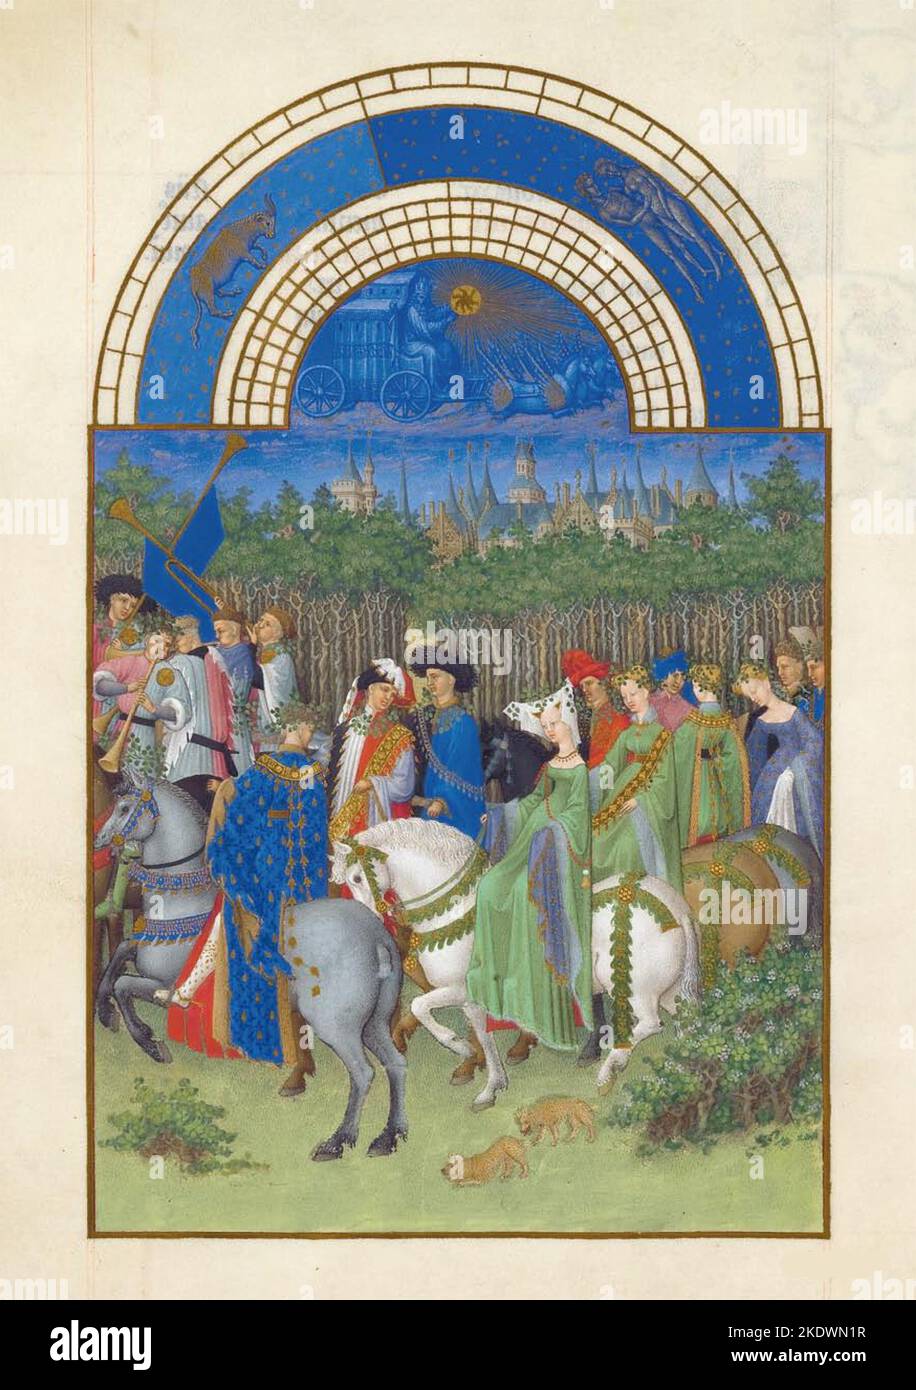 Très Riches Heures du duc de Berry Folio 5, verso: May. Date/Period: Between 1412 and 1416. Illumination. Painting on vellum. Height: 22.5 cm (8.8 in); Width: 13.6 cm (5.3 in). Stock Photo